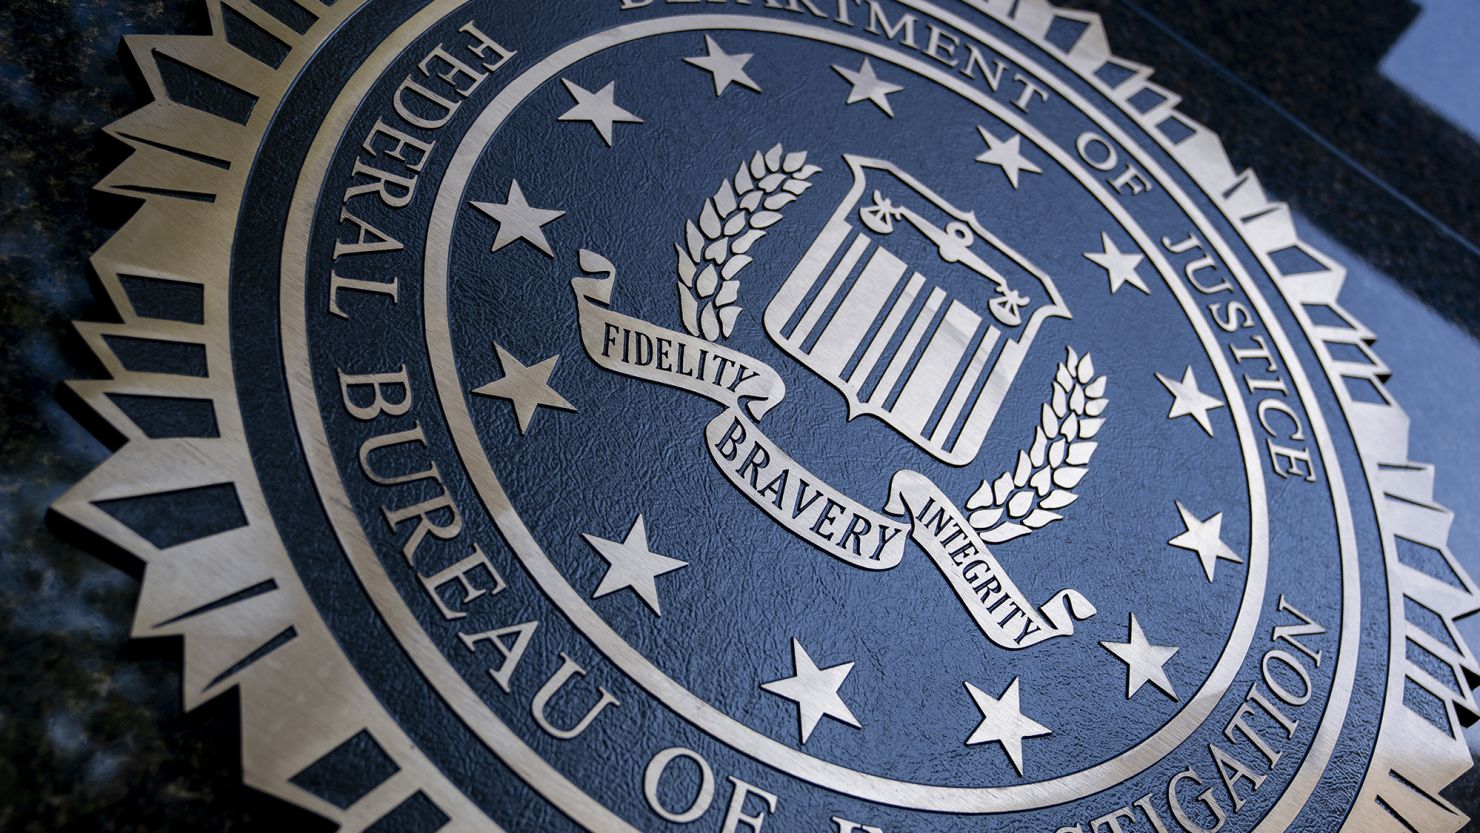 A seal reading "Department of Justice Federal Bureau of Investigation" is displayed on the J. Edgar Hoover FBI building in Washington, DC, on August 9, 2022.